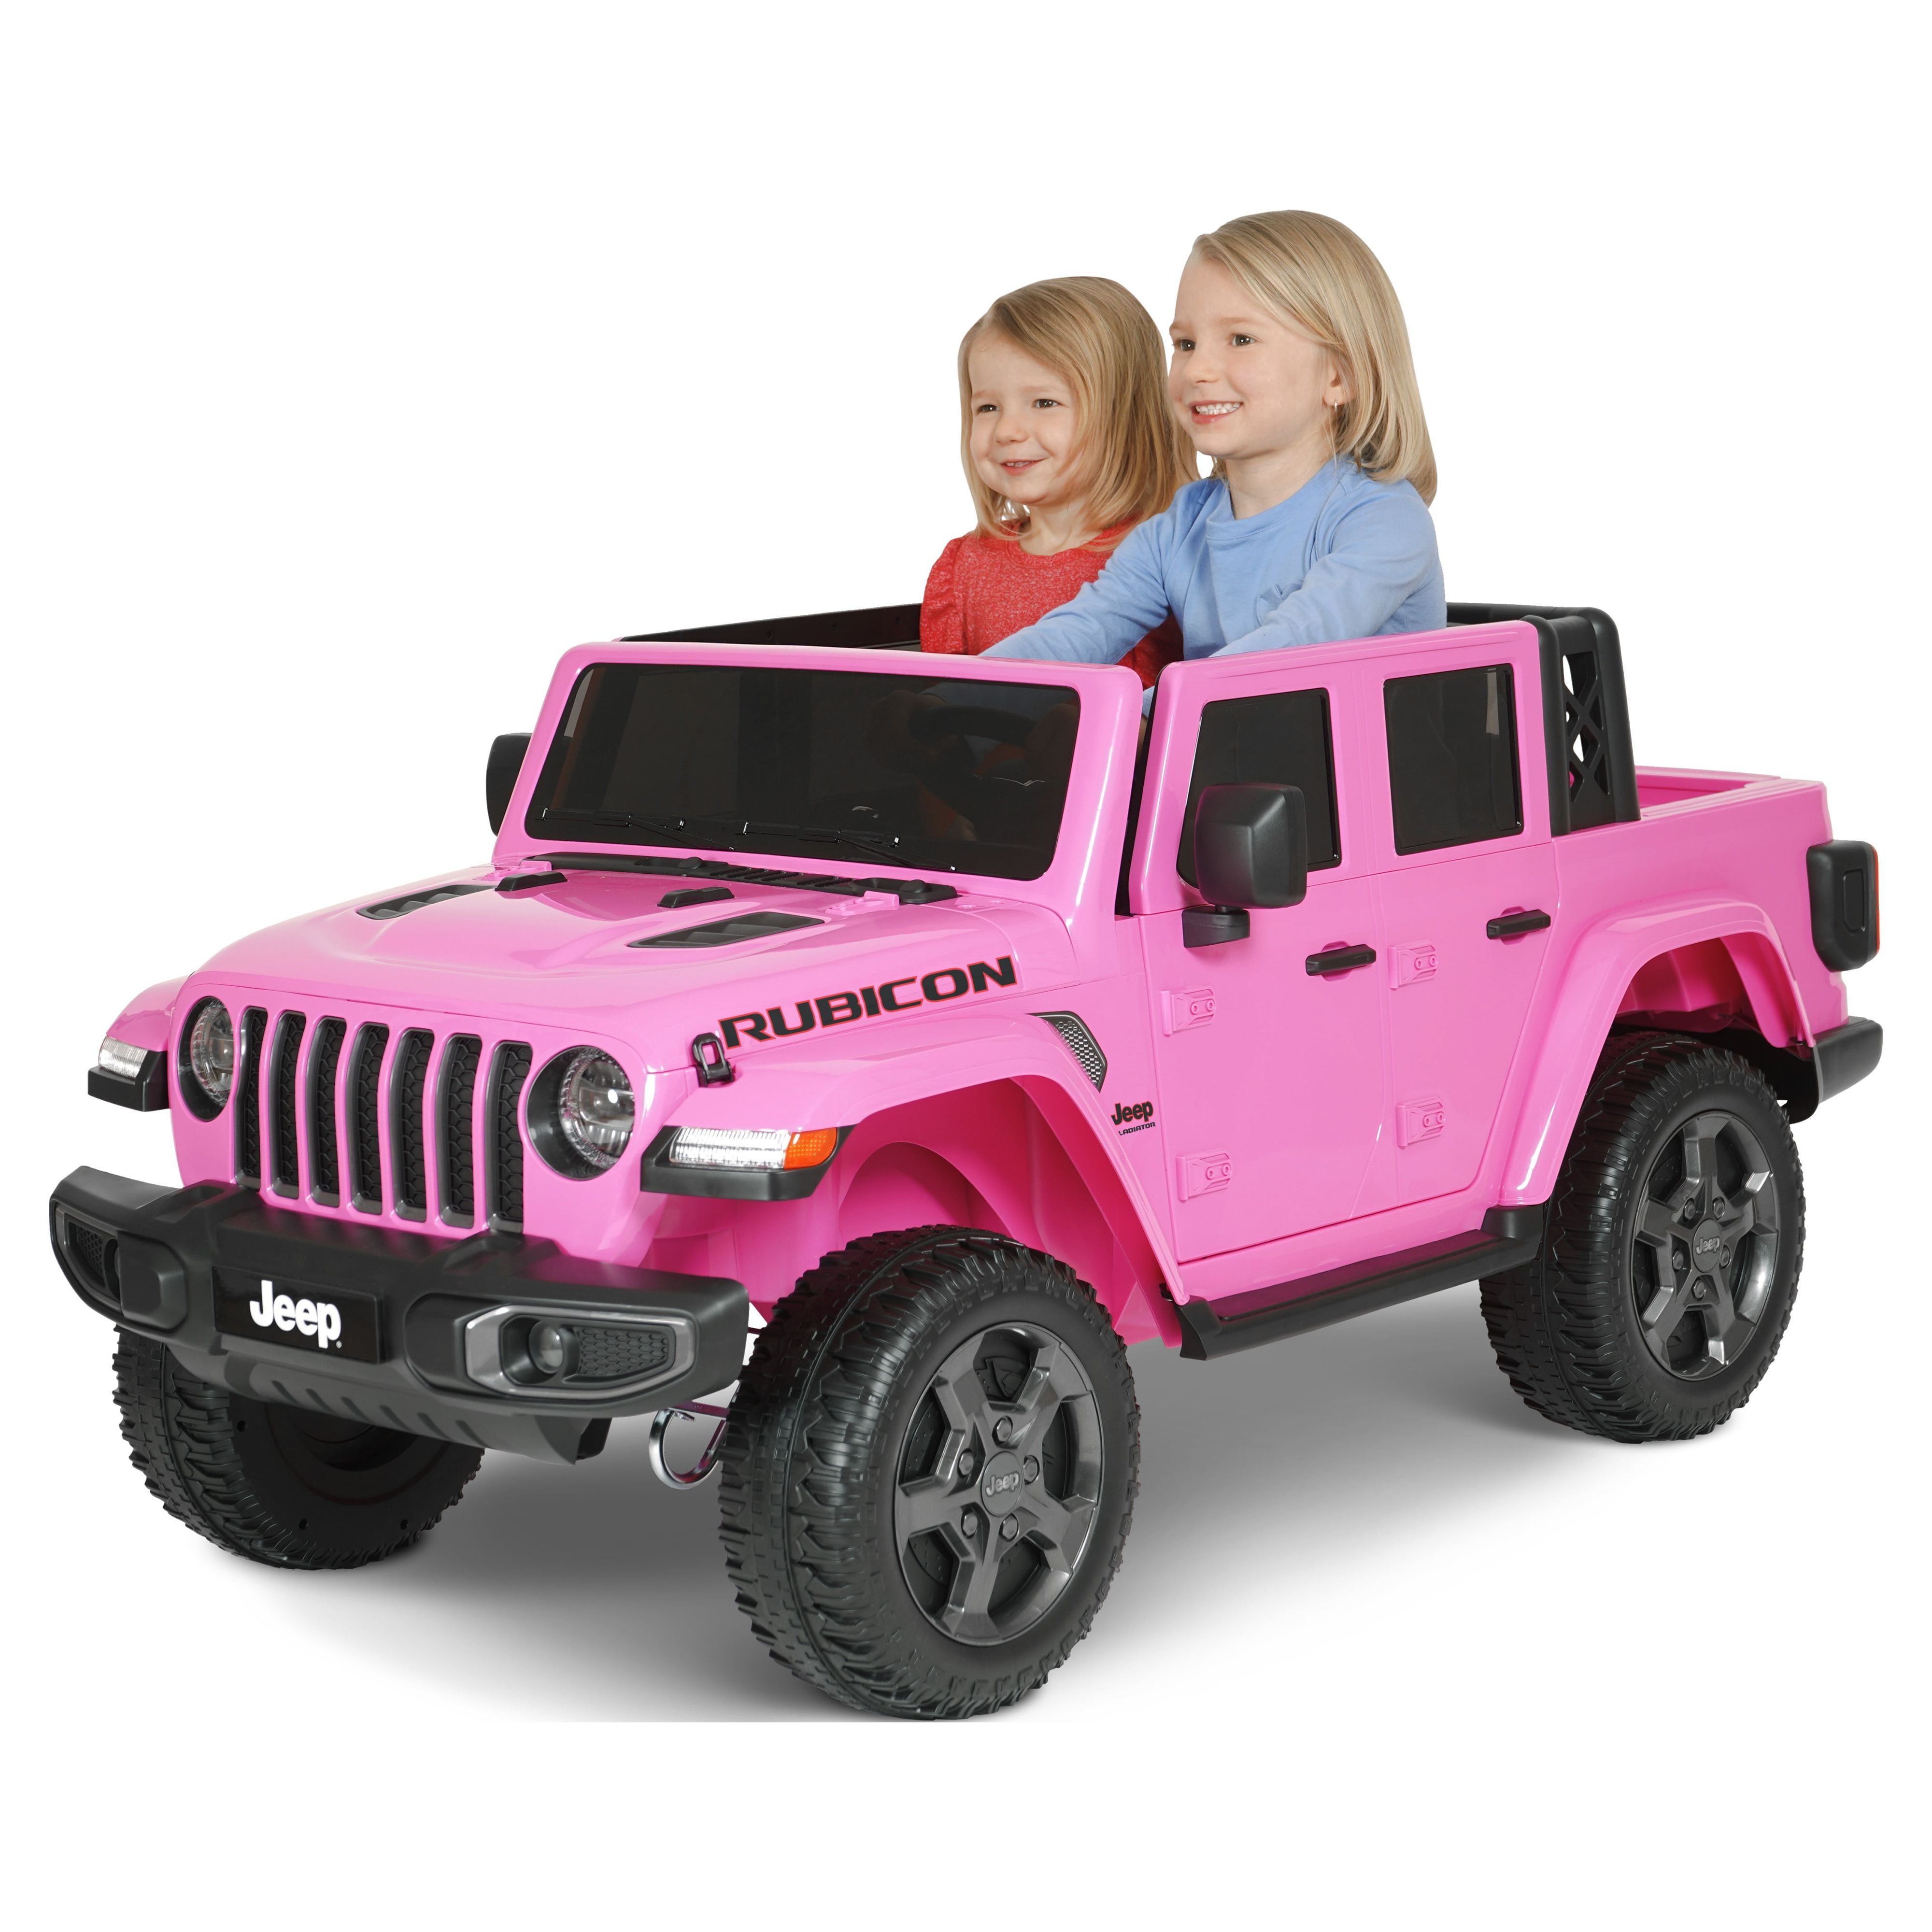 12V Jeep Gladiator Rubicon Battery Powered Ride-on by Hyper Toys, 2-Seater, Pink, for a Child Ages 3-8, Max Speed 5 mph - image 1 of 13